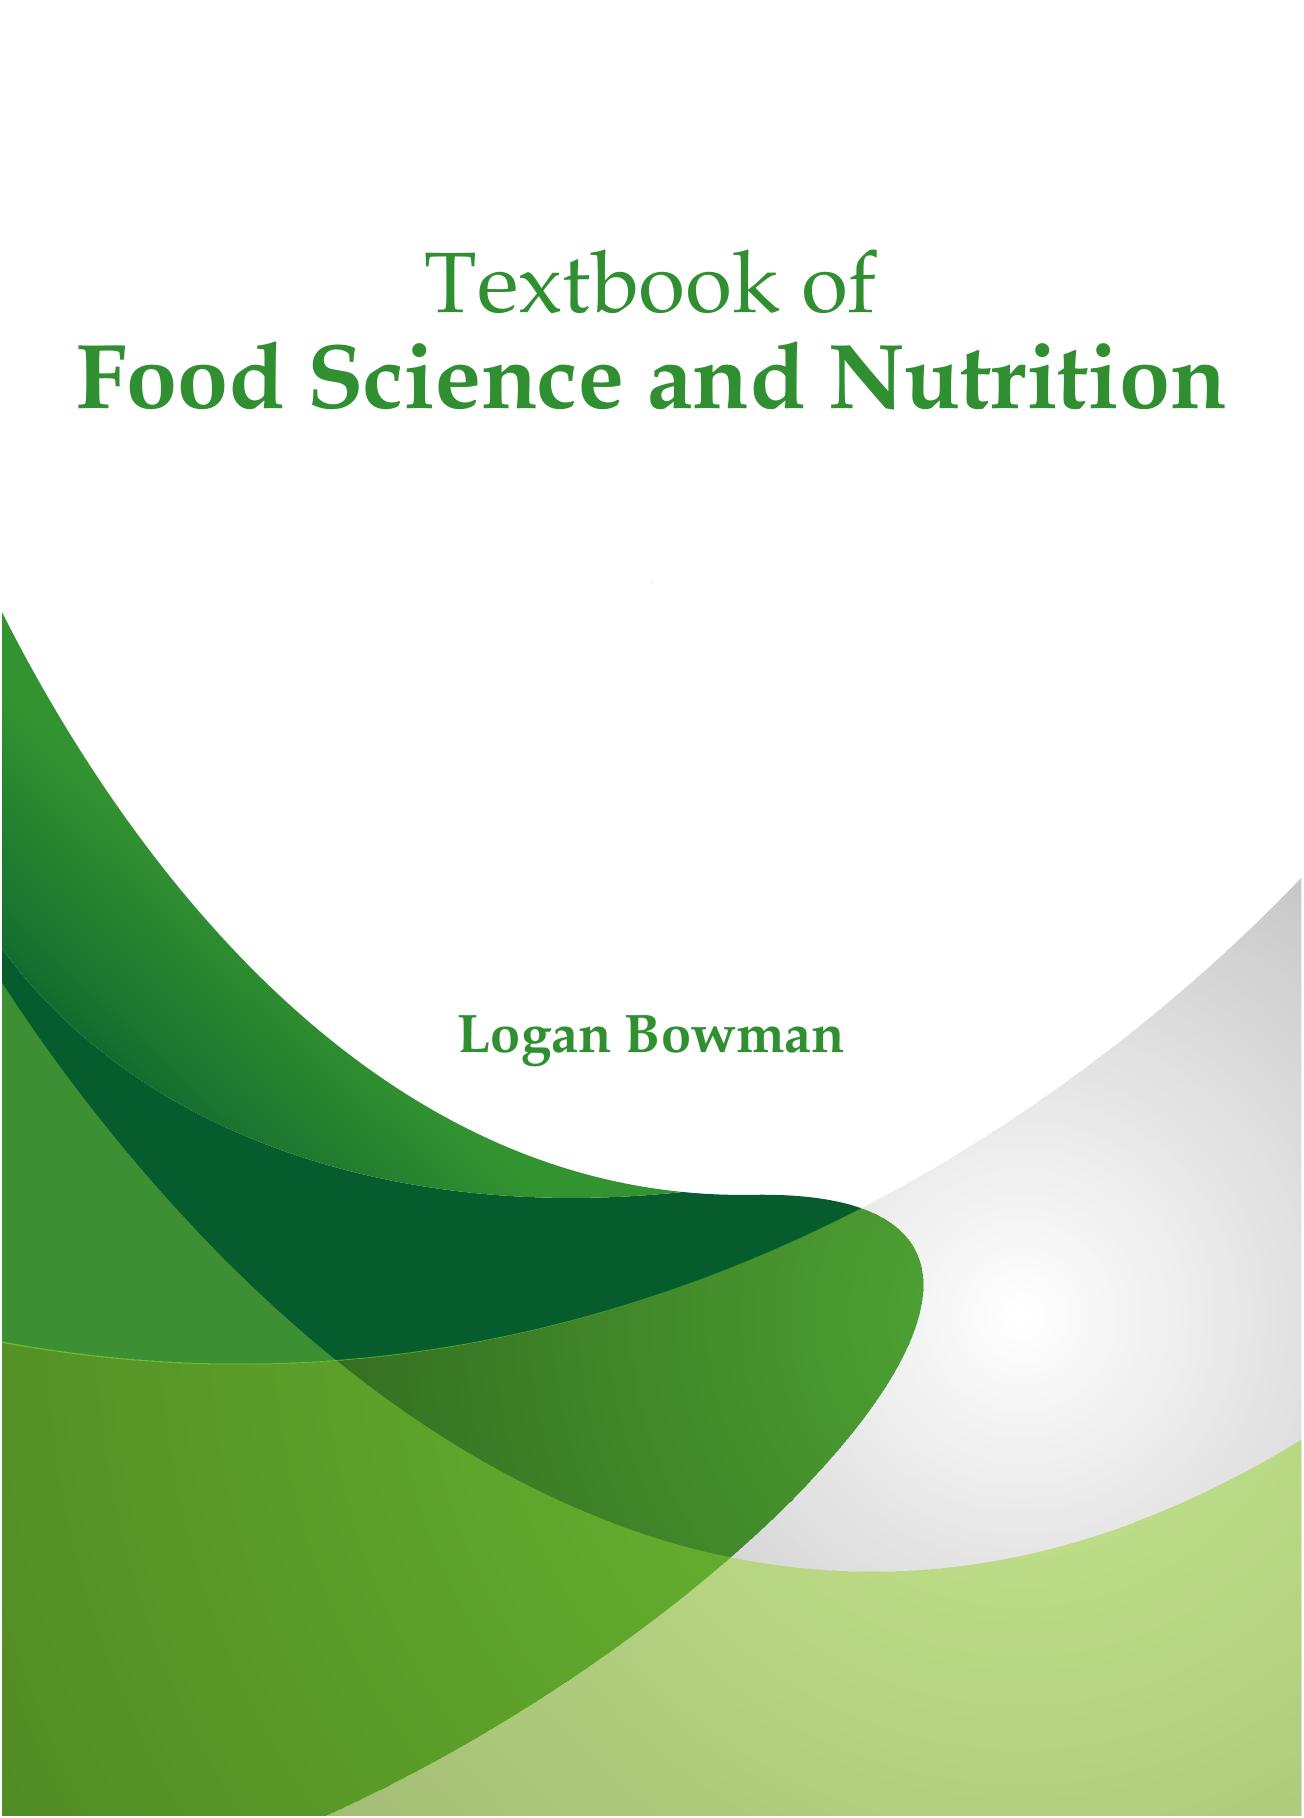 Food Science and Nutrition 2017